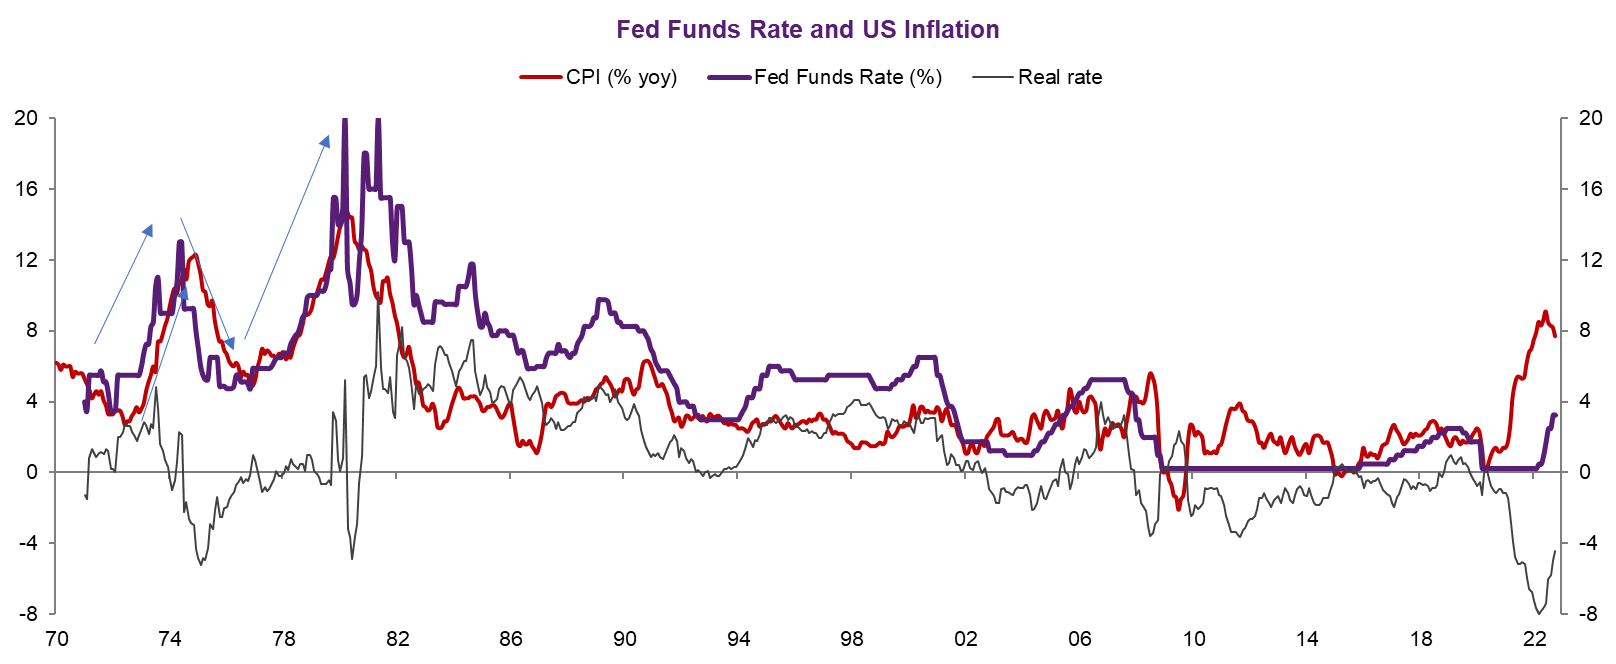 Trinh On Twitter Fed Funds Rate Upper Bound Us Cpi And Real Rates